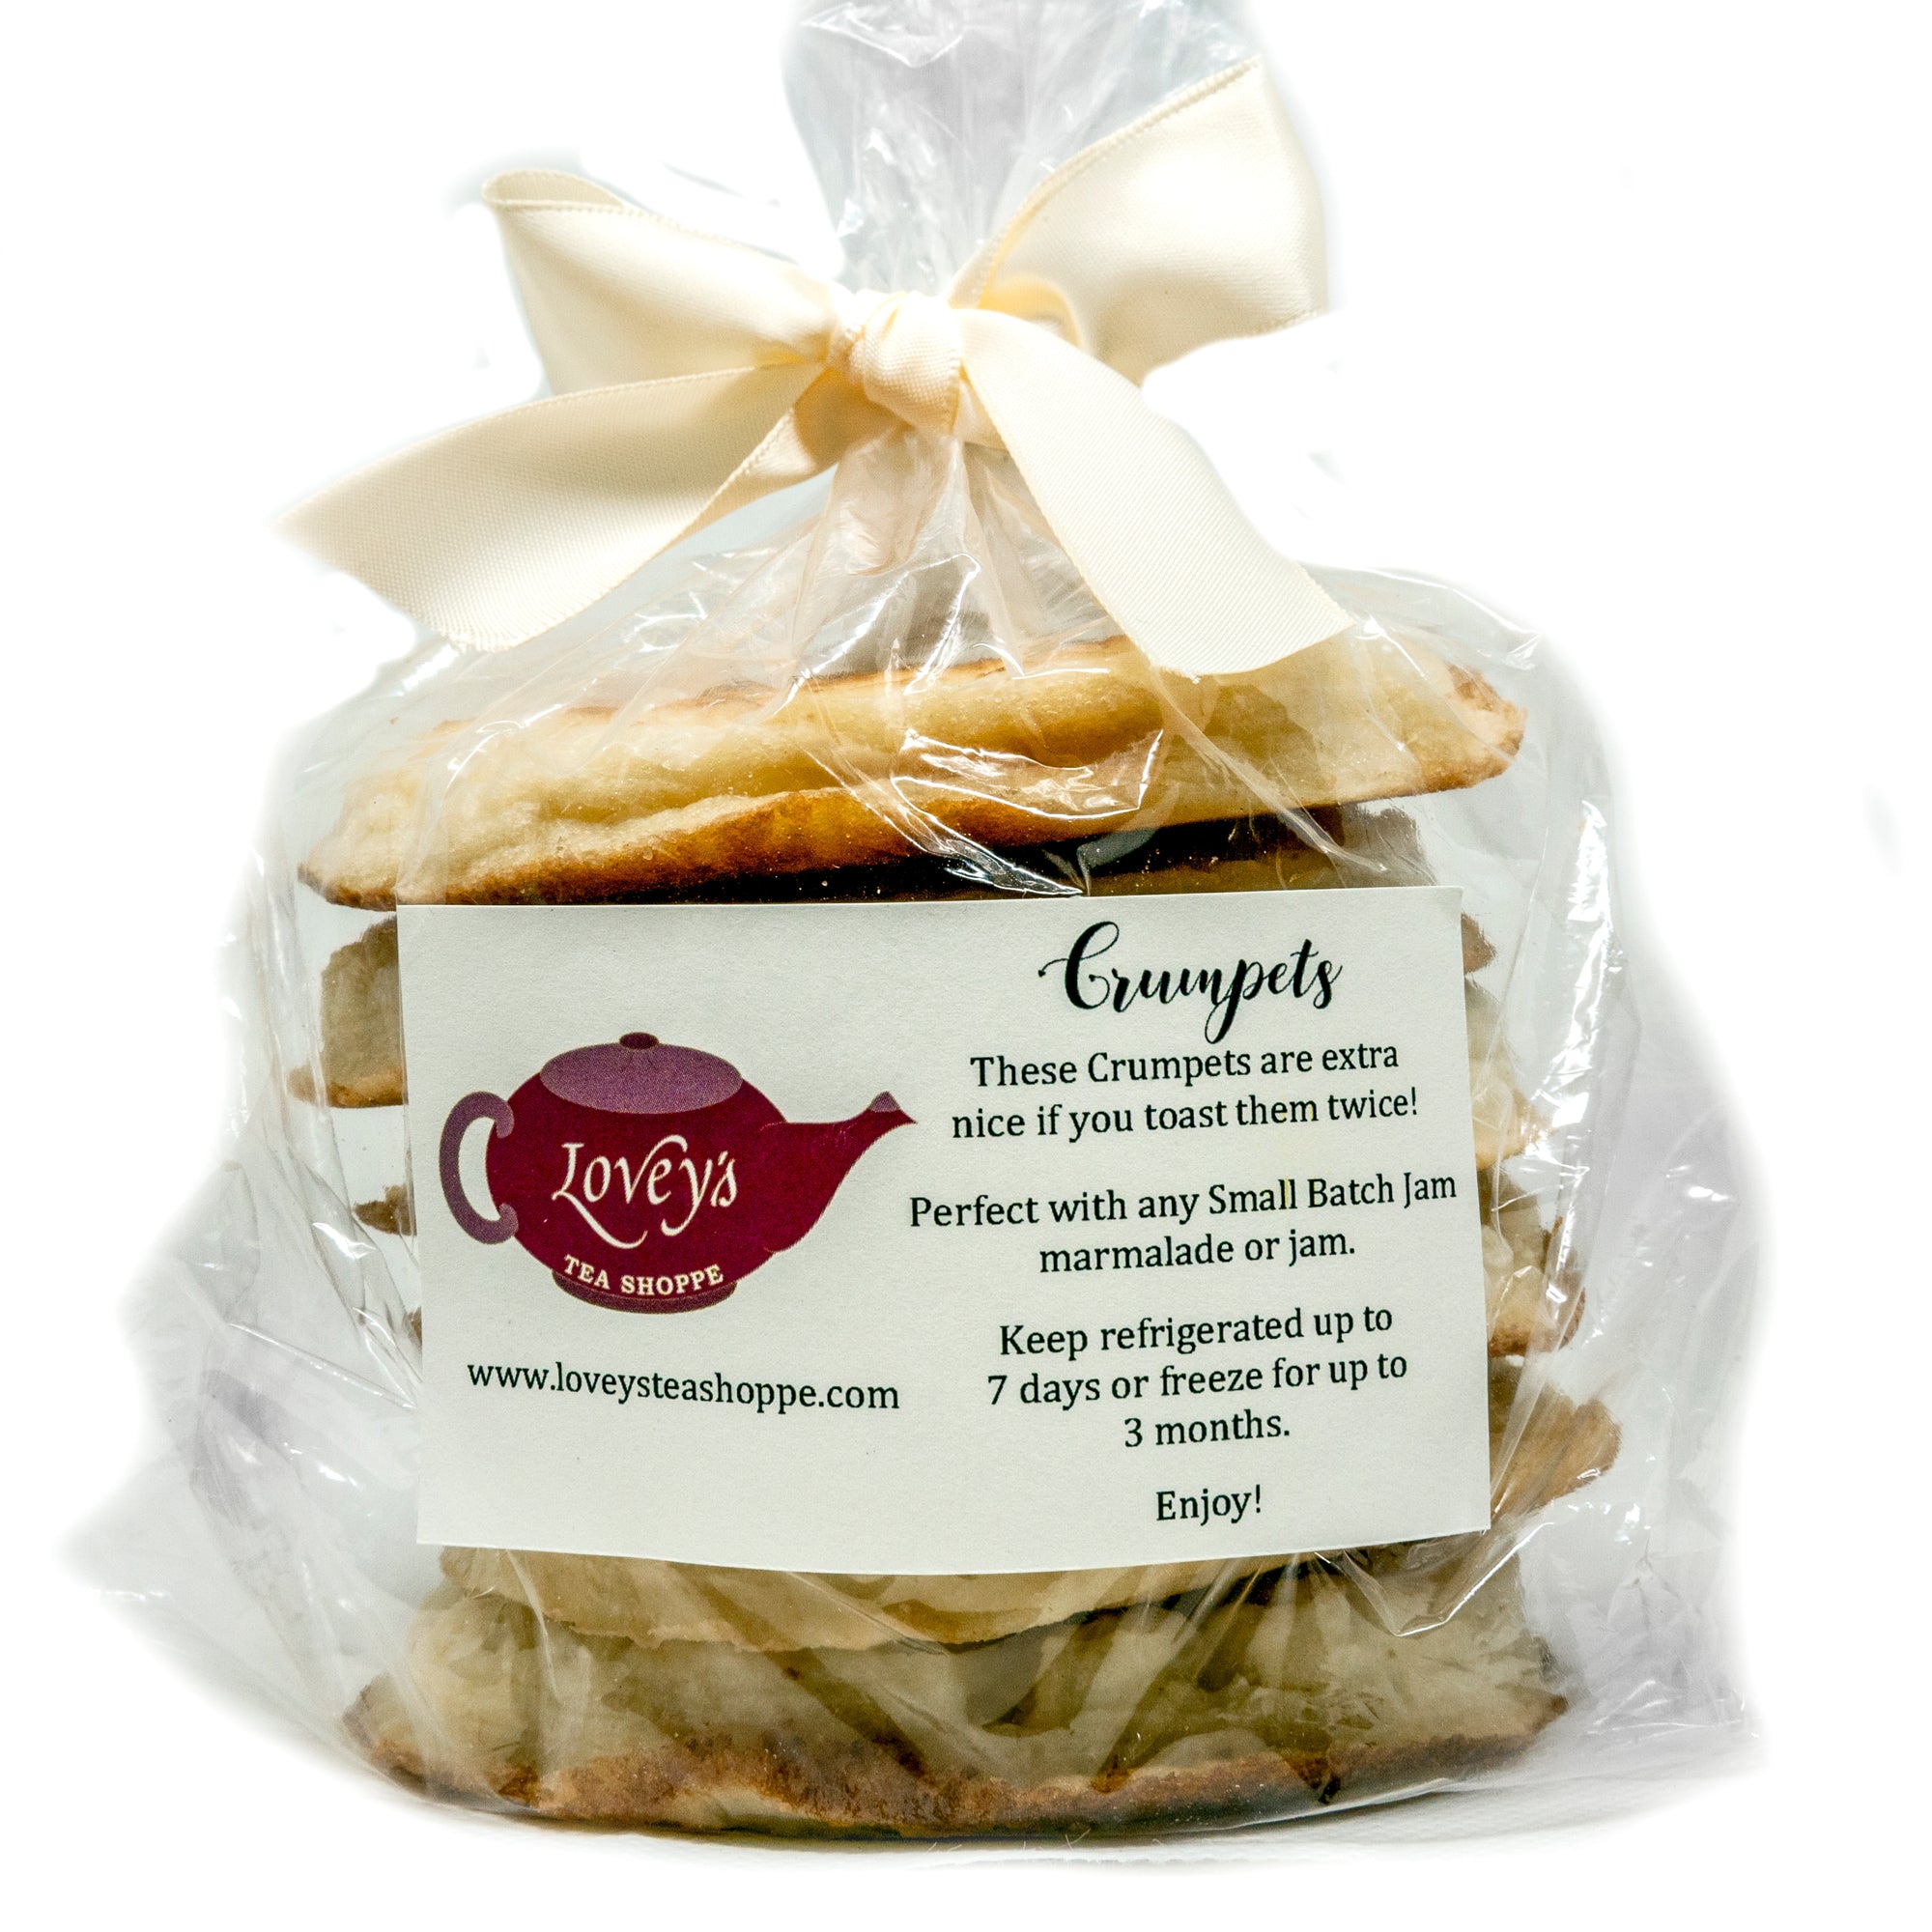 Lovey’s Tea Shoppe Crumpets - 6 Pack